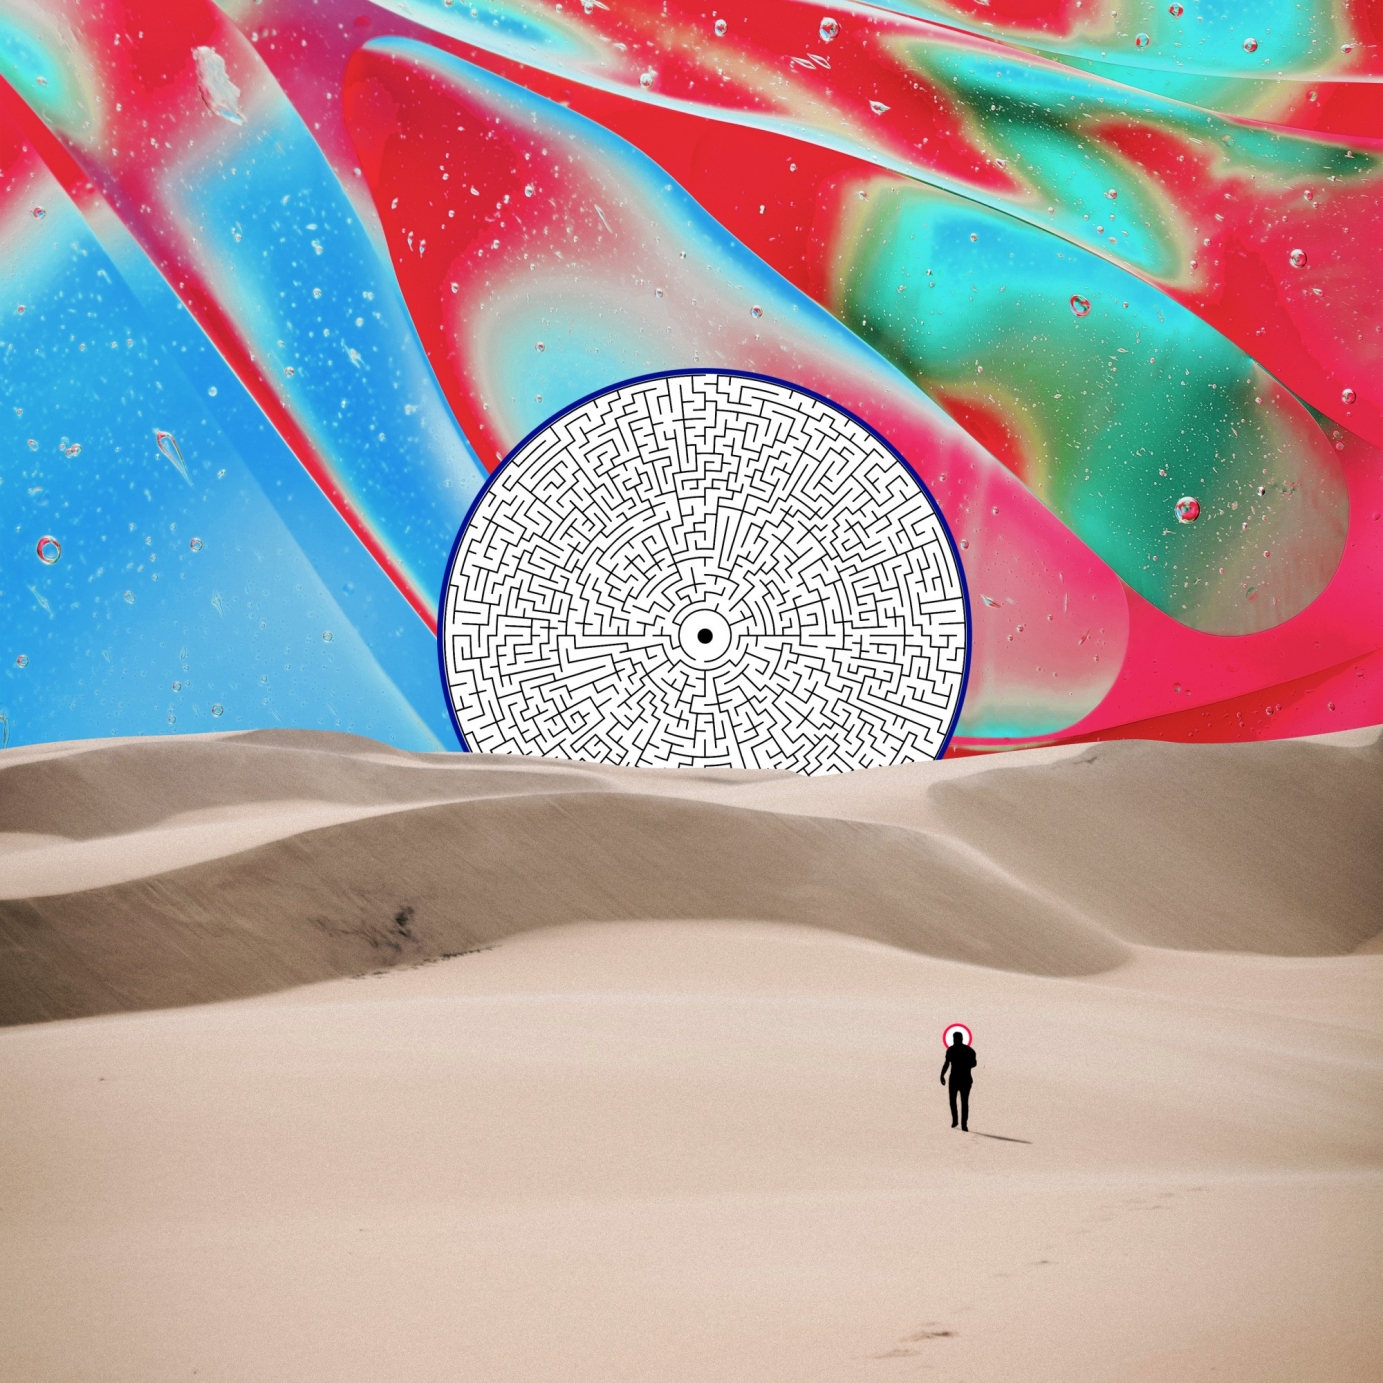 Collage-based Surreal Album Cover for single "Universe" by Rad